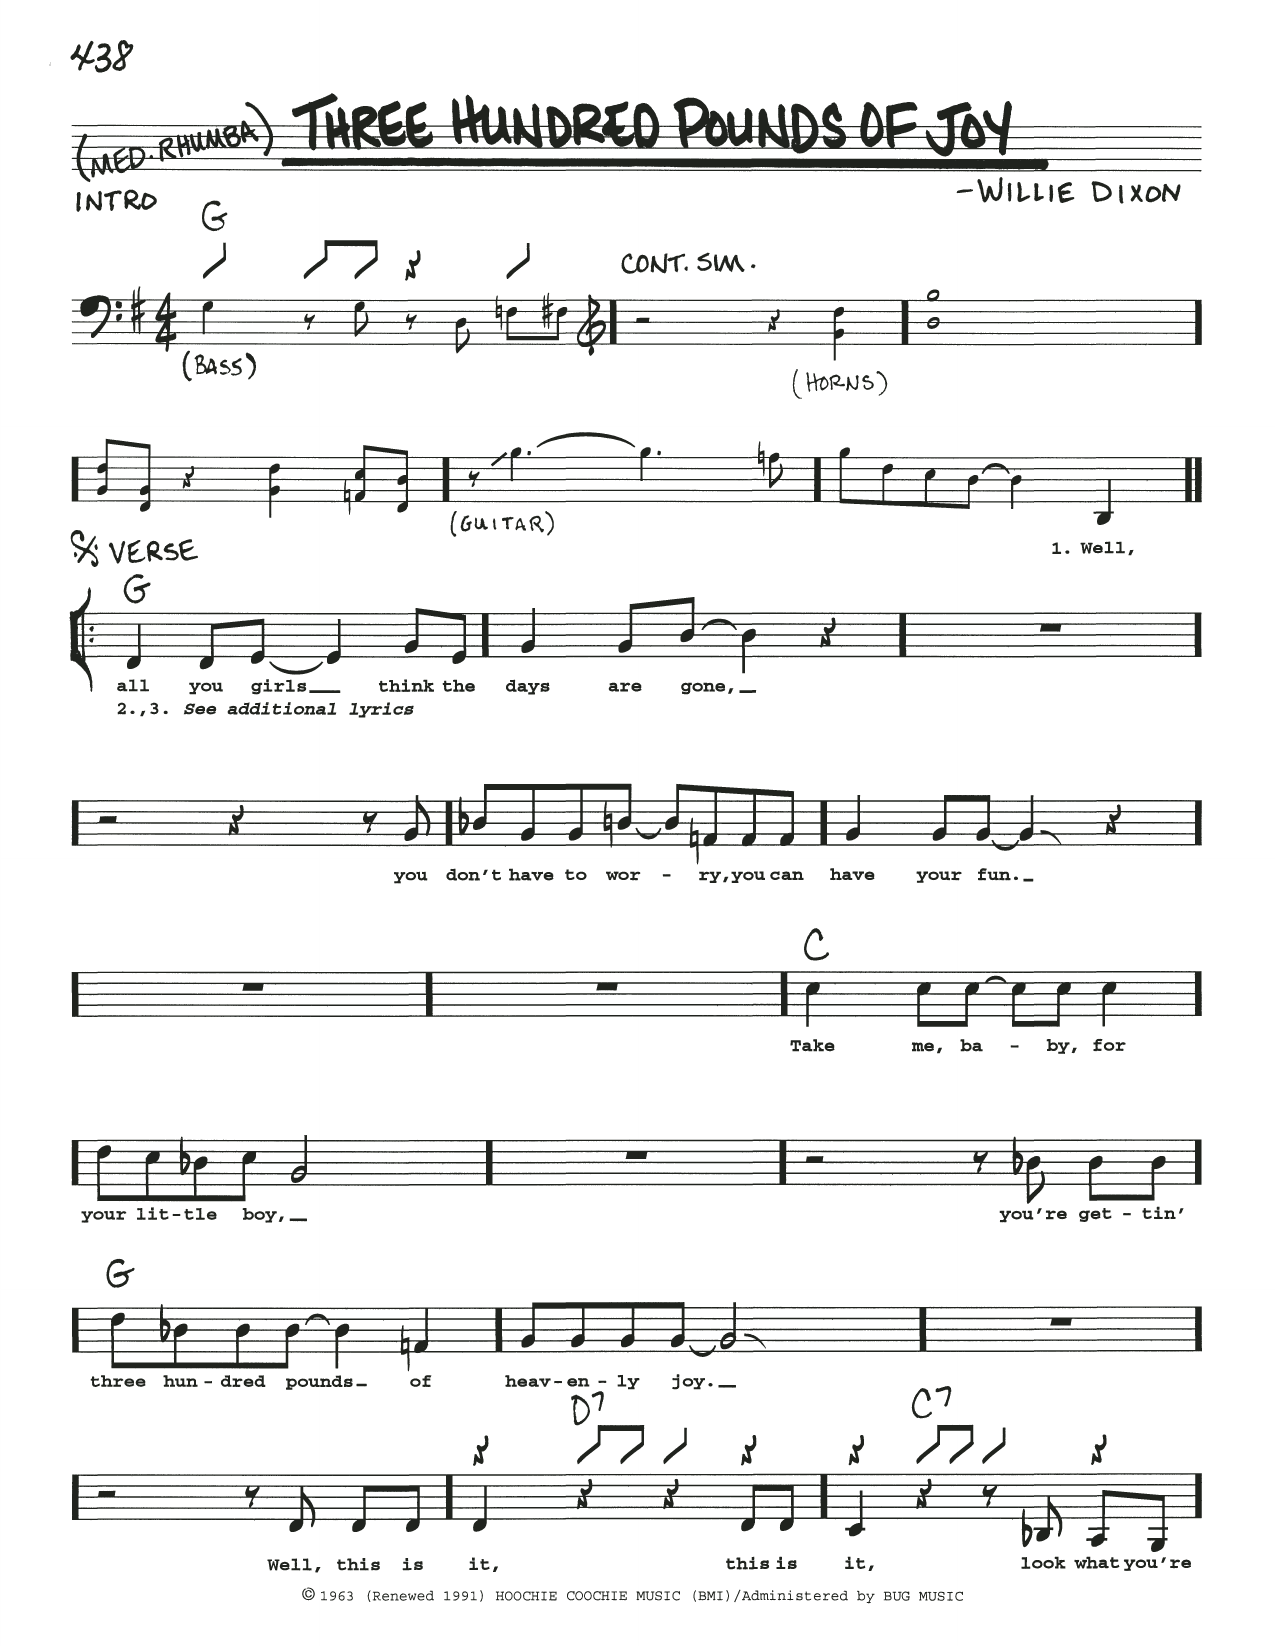 Download Willie Dixon Three Hundred Pounds Of Joy Sheet Music